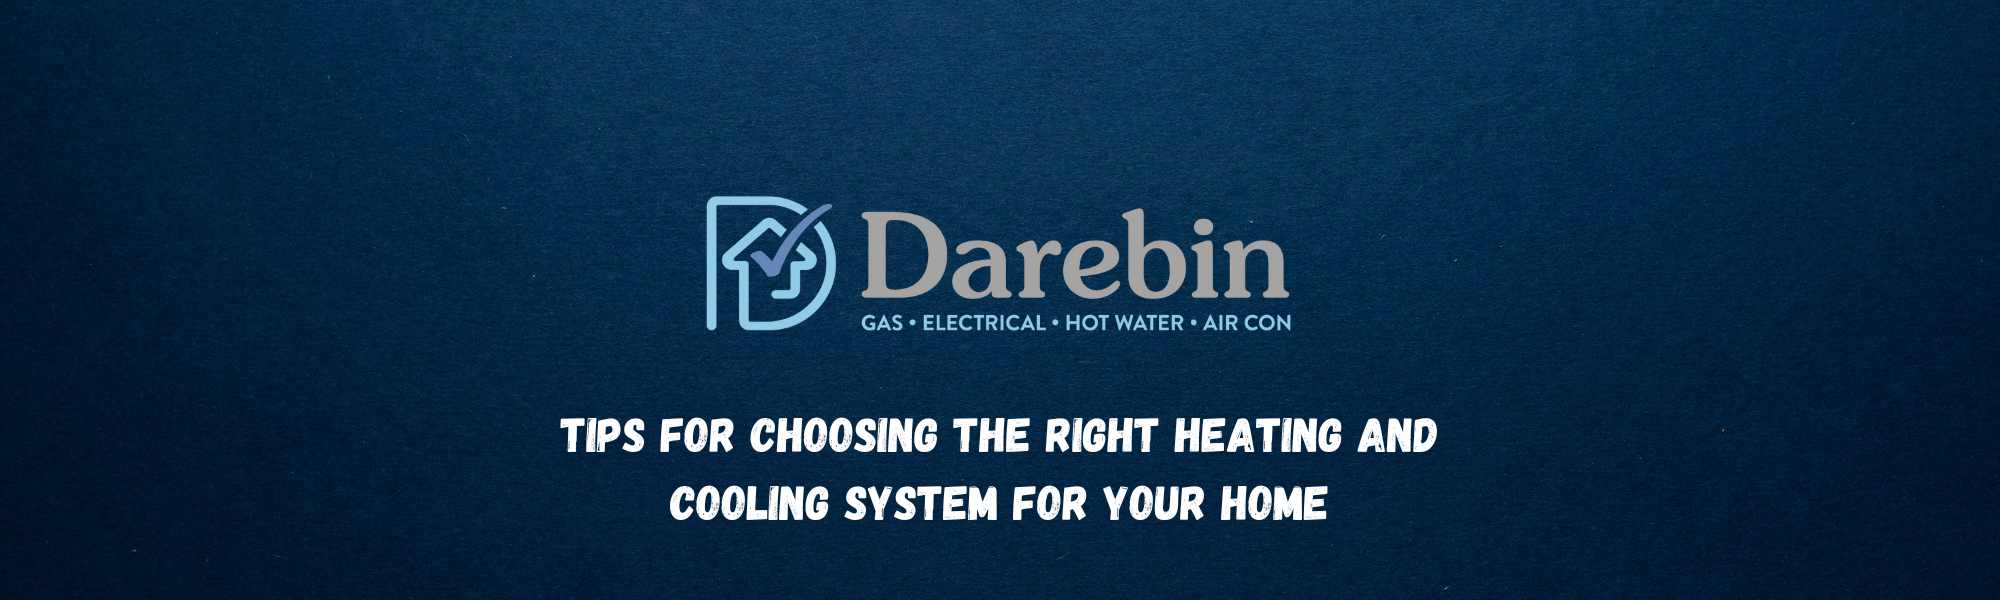 Tips For Choosing the Right Heating and Cooling System for Your Home